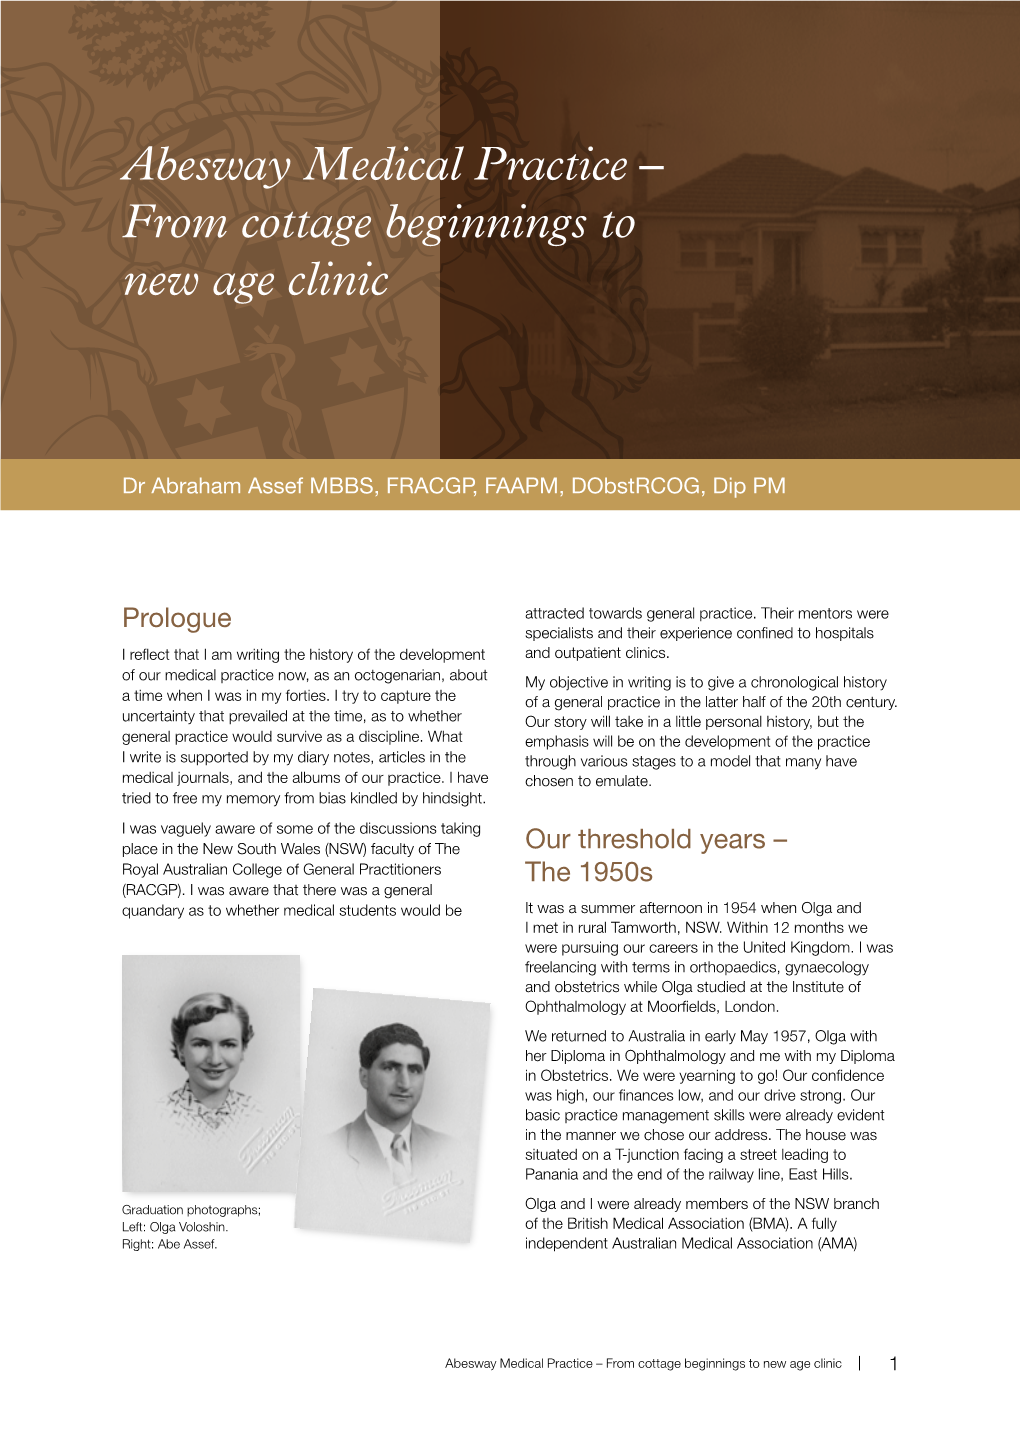 Abesway Medical Practice – from Cottage Beginnings to New Age Clinic